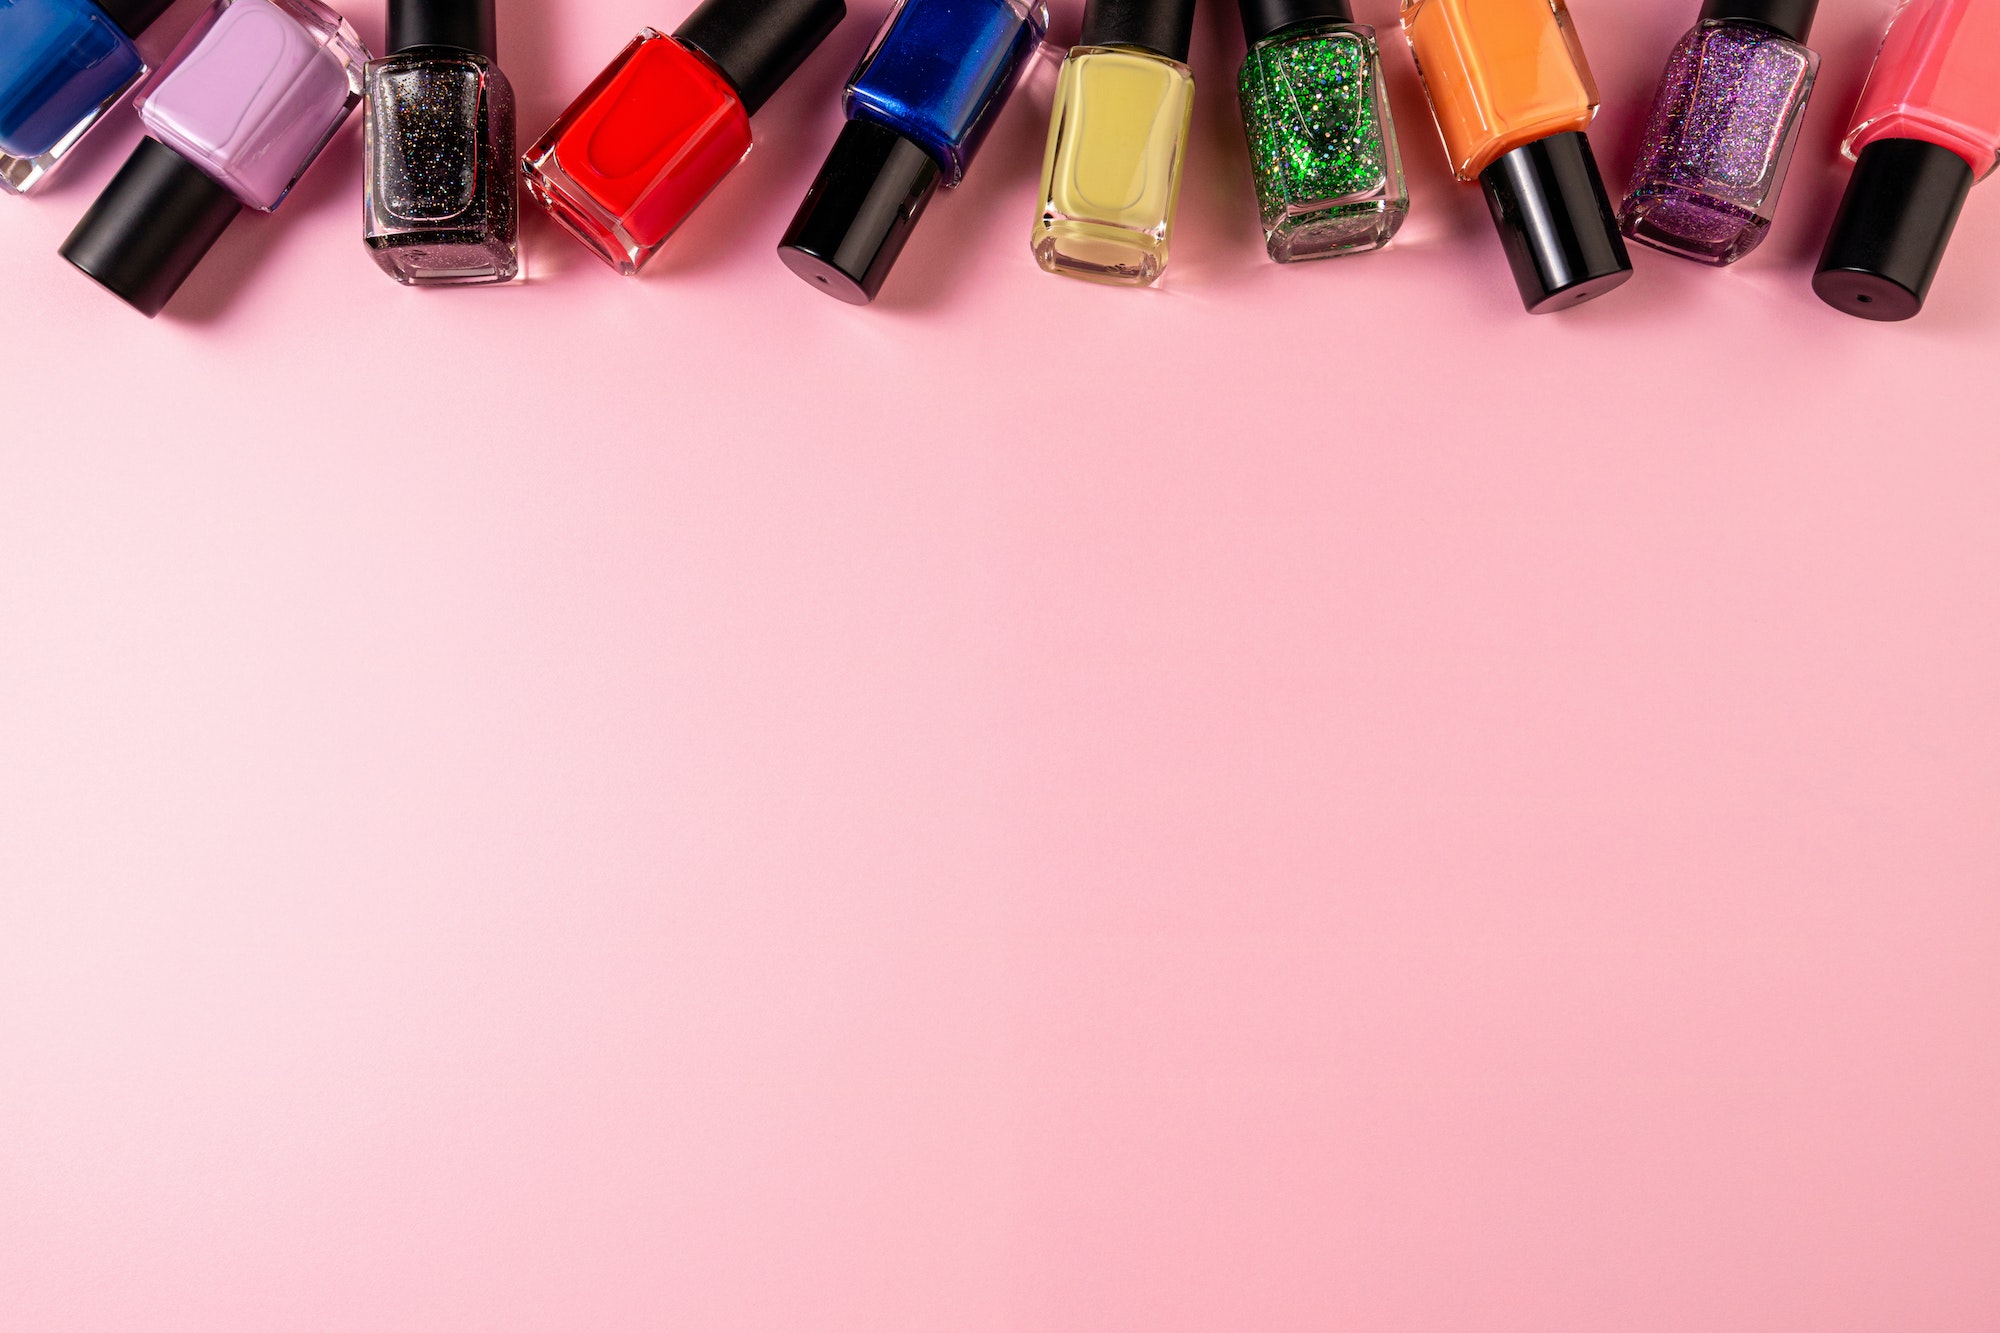 Set of various nail polish bottle on pink background with copy space. Stylish trendy nail polish